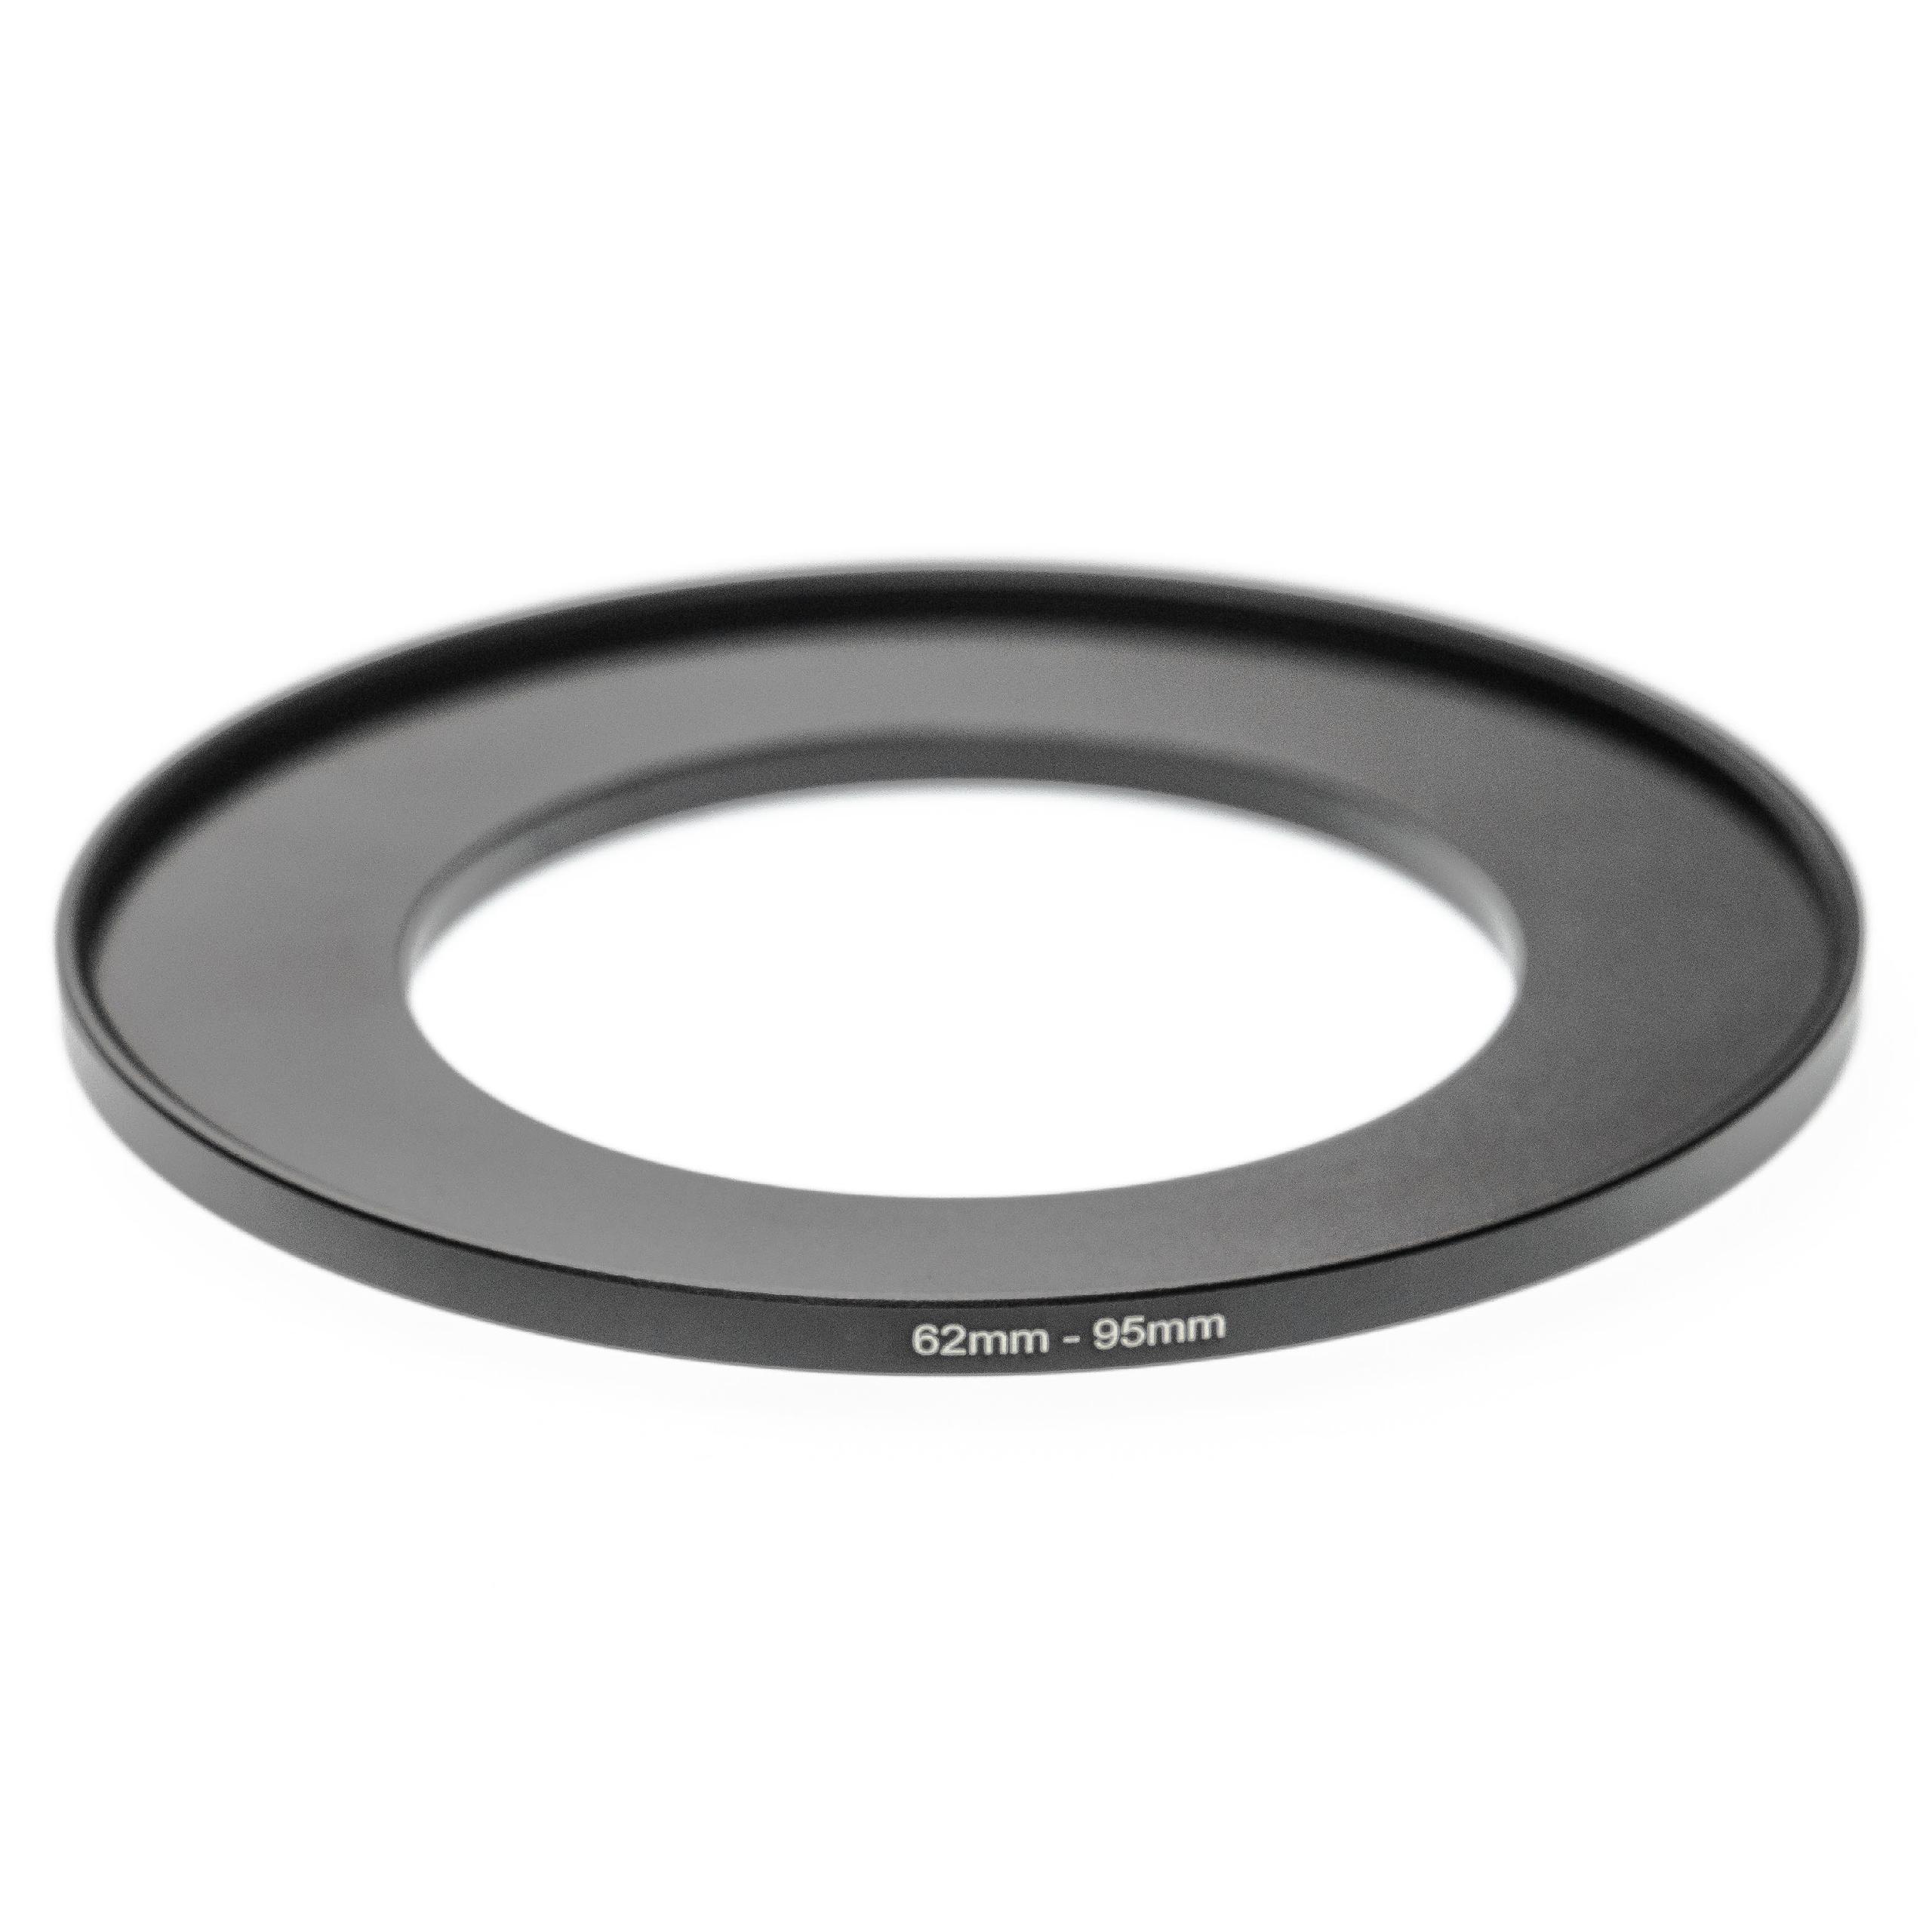 Step-Up Ring Adapter of 62 mm to 95 mmfor various Camera Lens - Filter Adapter